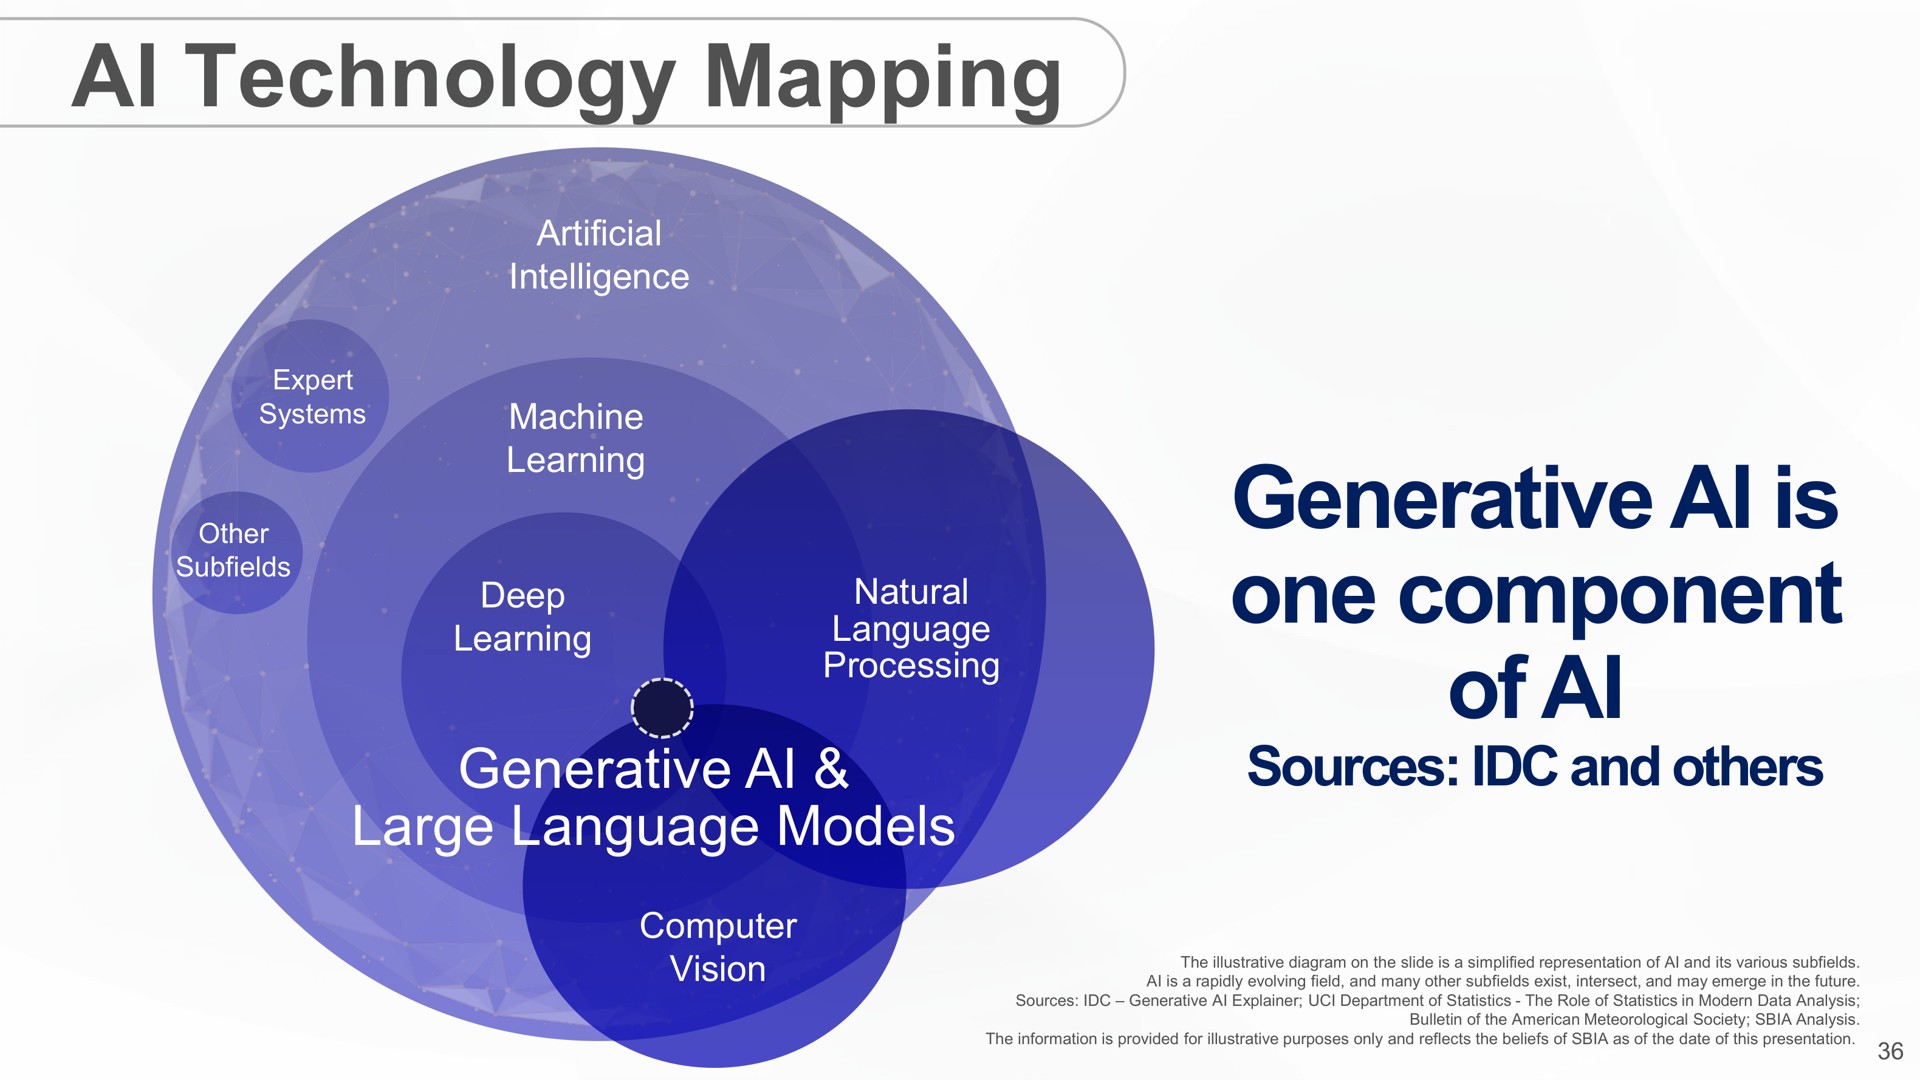 technology mapping generative is one component of coo sources and | SoftBank